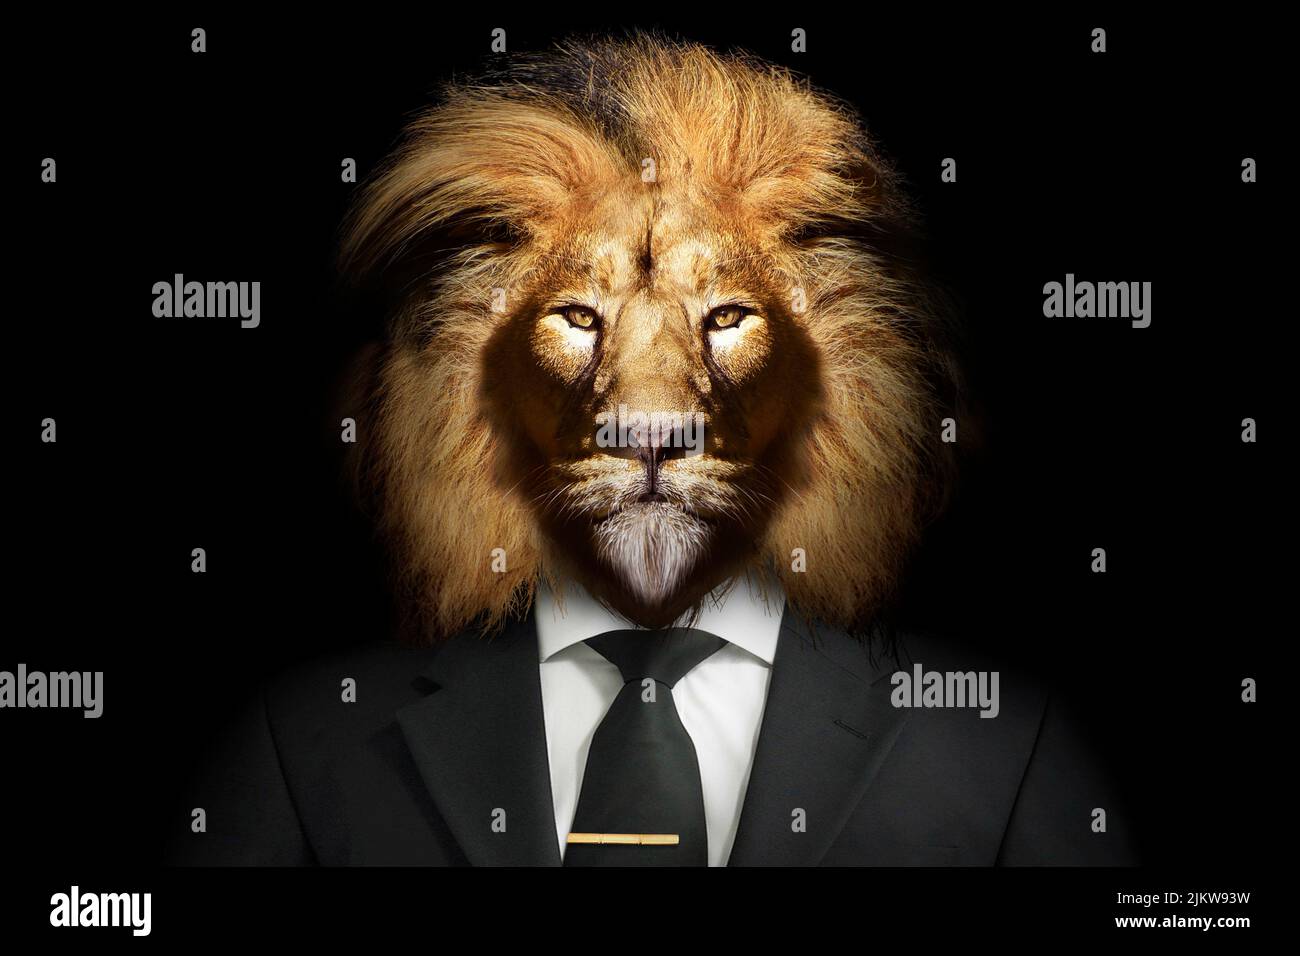 A lion with a classy look in a suit Stock Photo